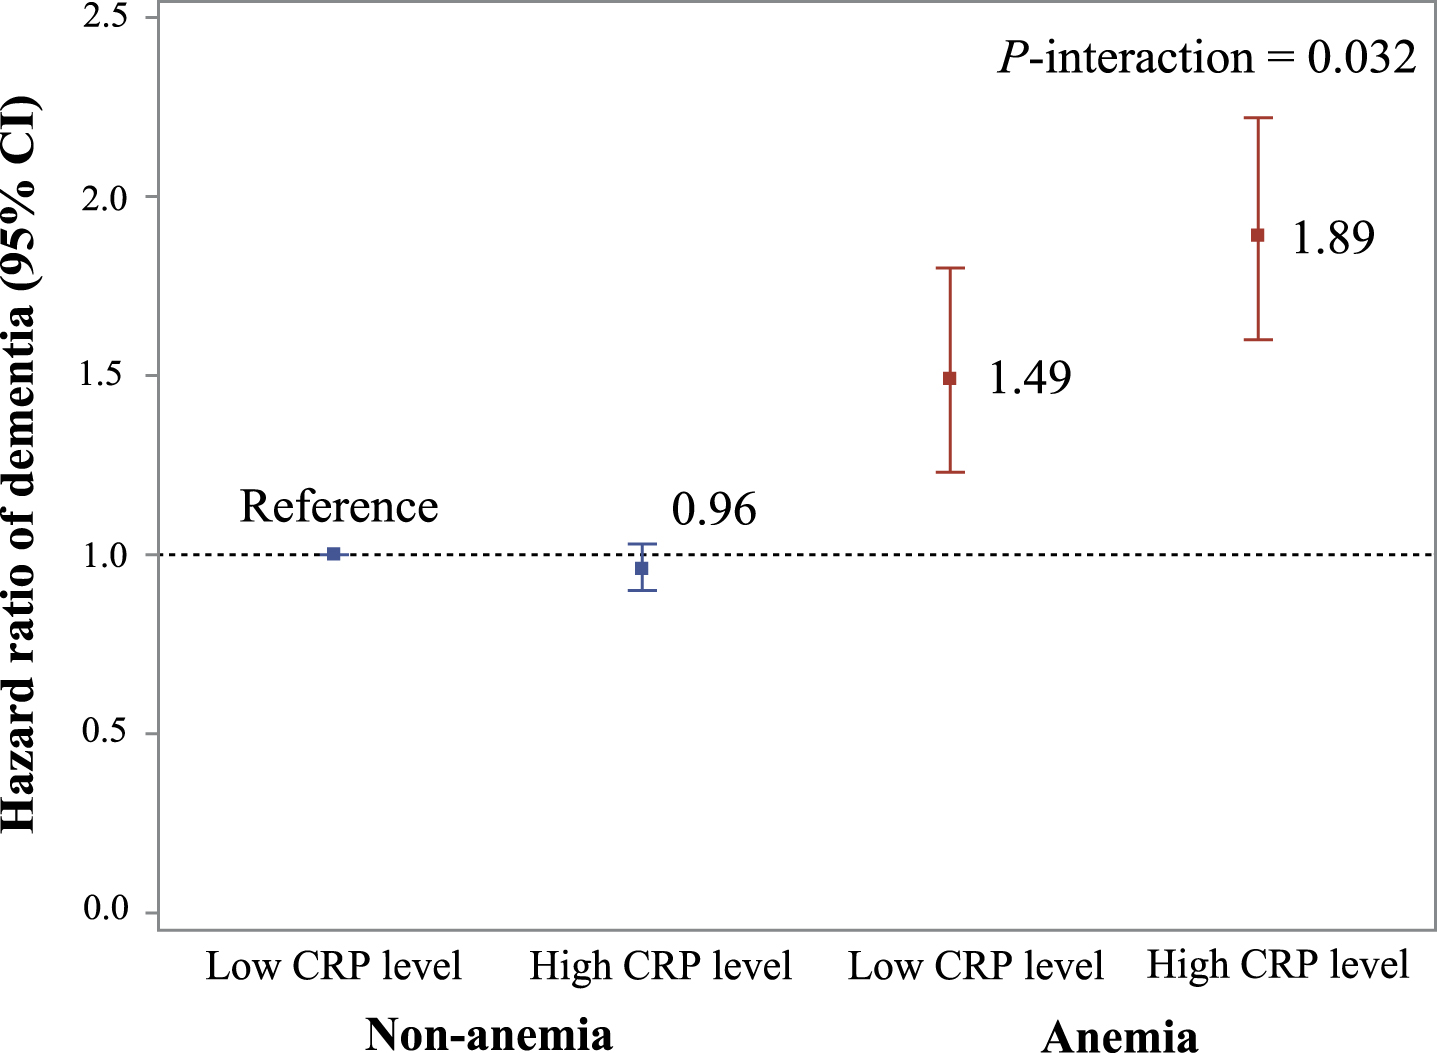 Joint effect of anemia and CRP level on risk of dementia. Model adjusted for age, sex, education, race, Townsend deprivation index, smoking status, alcohol consumption status, body mass index, regular physical activity, active social connection, apolipoprotein E epsilon 4, and chronic conditions. p-interaction <0.05 refers to a significant multiplicative interaction between anemia status and the level of C-creative protein on dementia. There is not significant difference between anemia with low CRP level and anemia with high CRP level (p = 0.058).